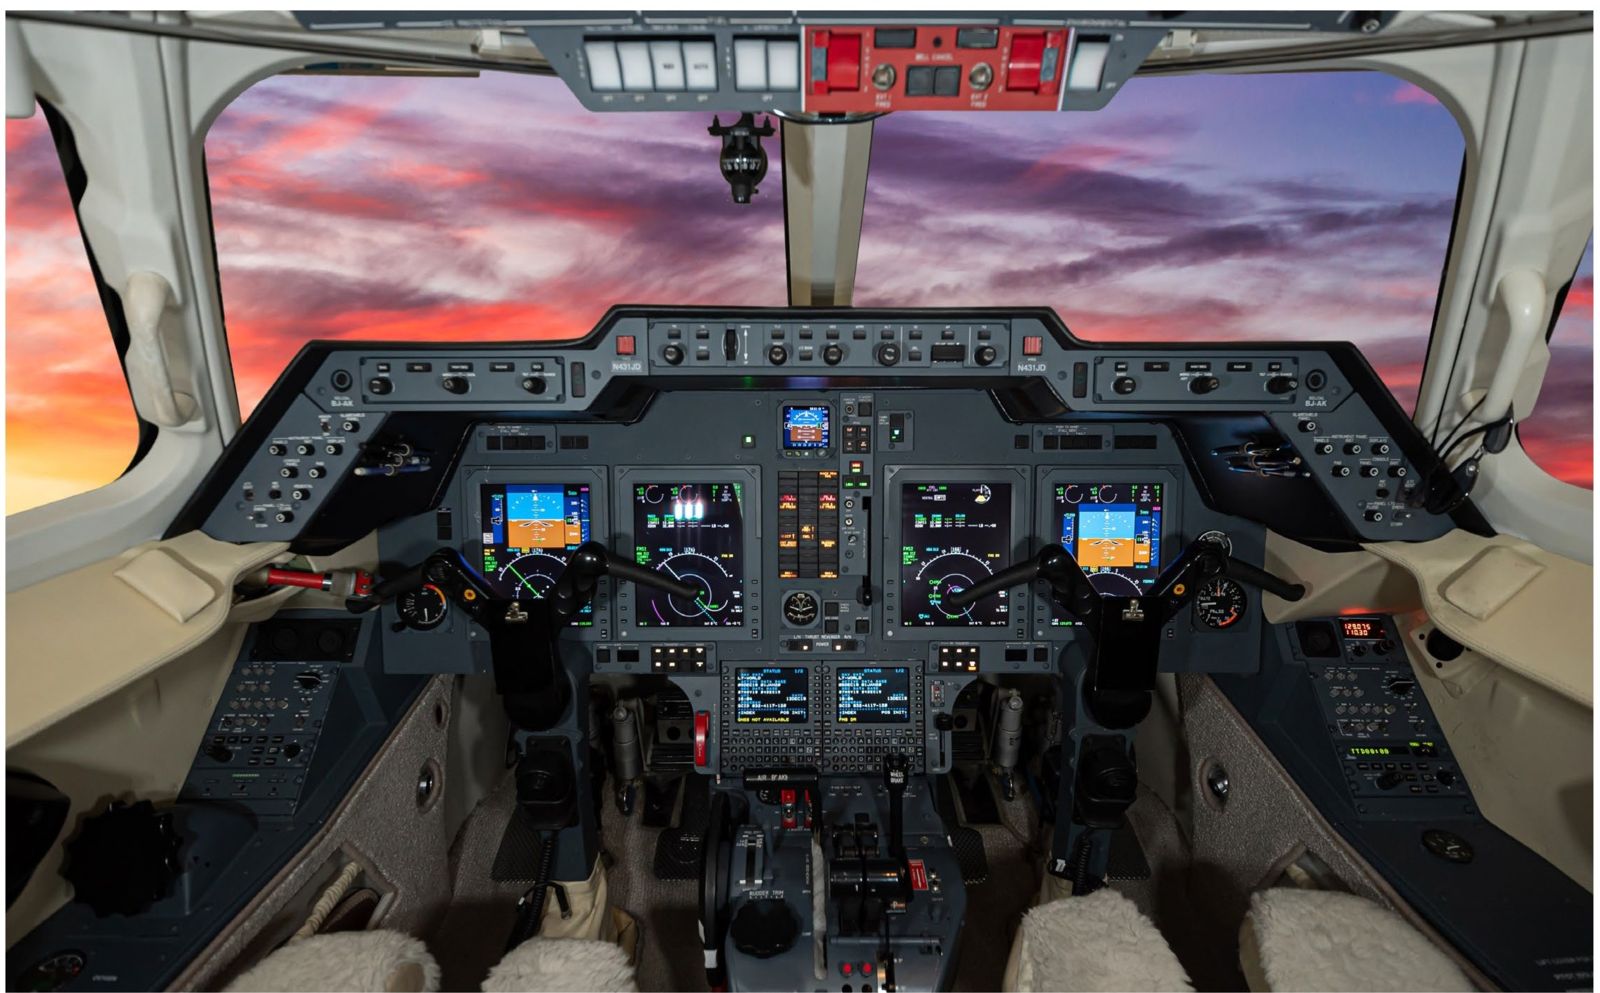 Hawker/Textron 900XP  S/N HA-0117 for sale | gallery image: /userfiles/images/aircraft-listing/_aircraft/Hawker%20900XP%20HA-0117/cockpit.jpg